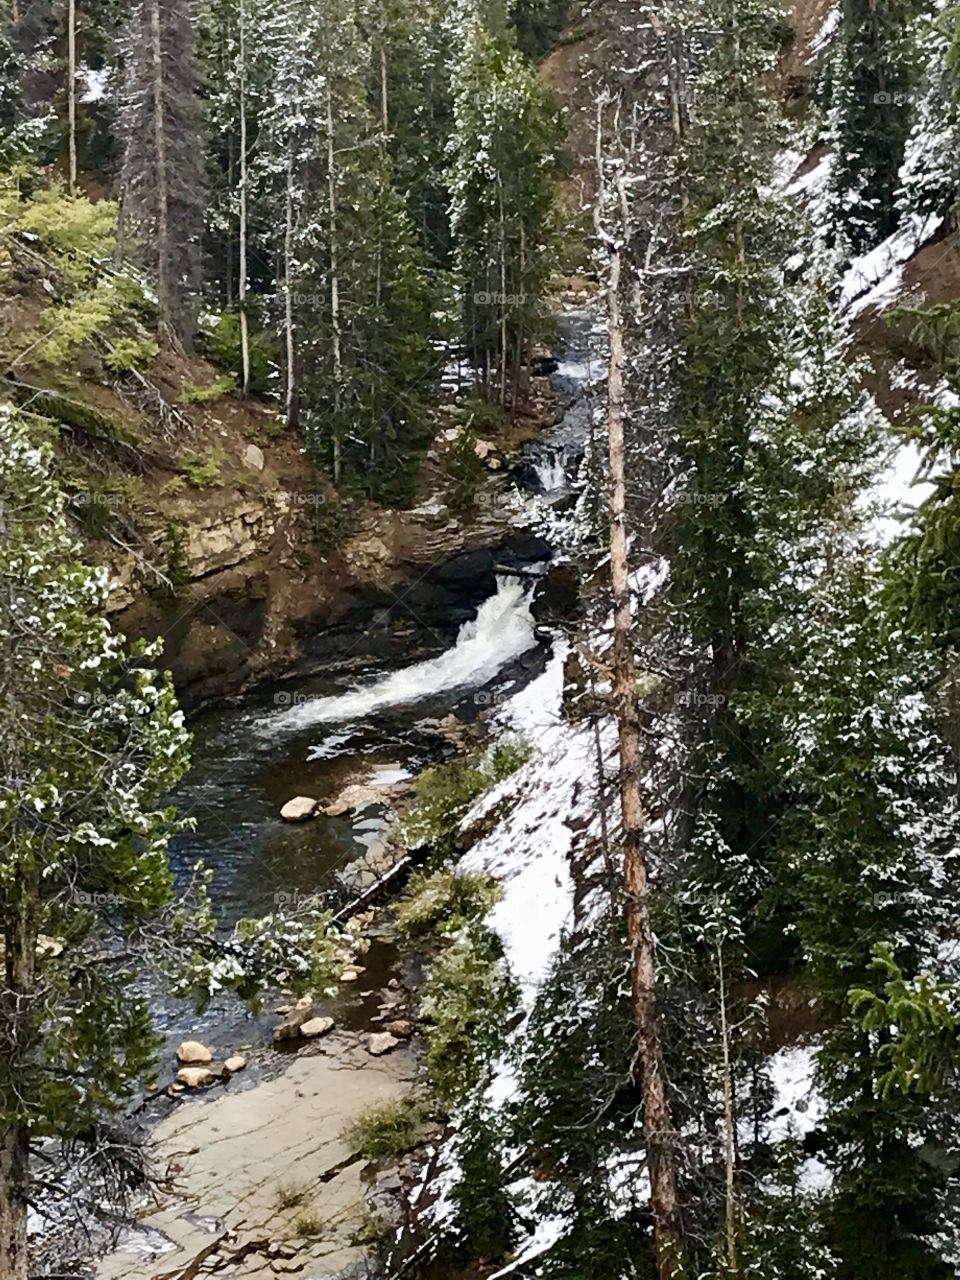 Waterfall with snow in the high Uinta Mountains, Utah